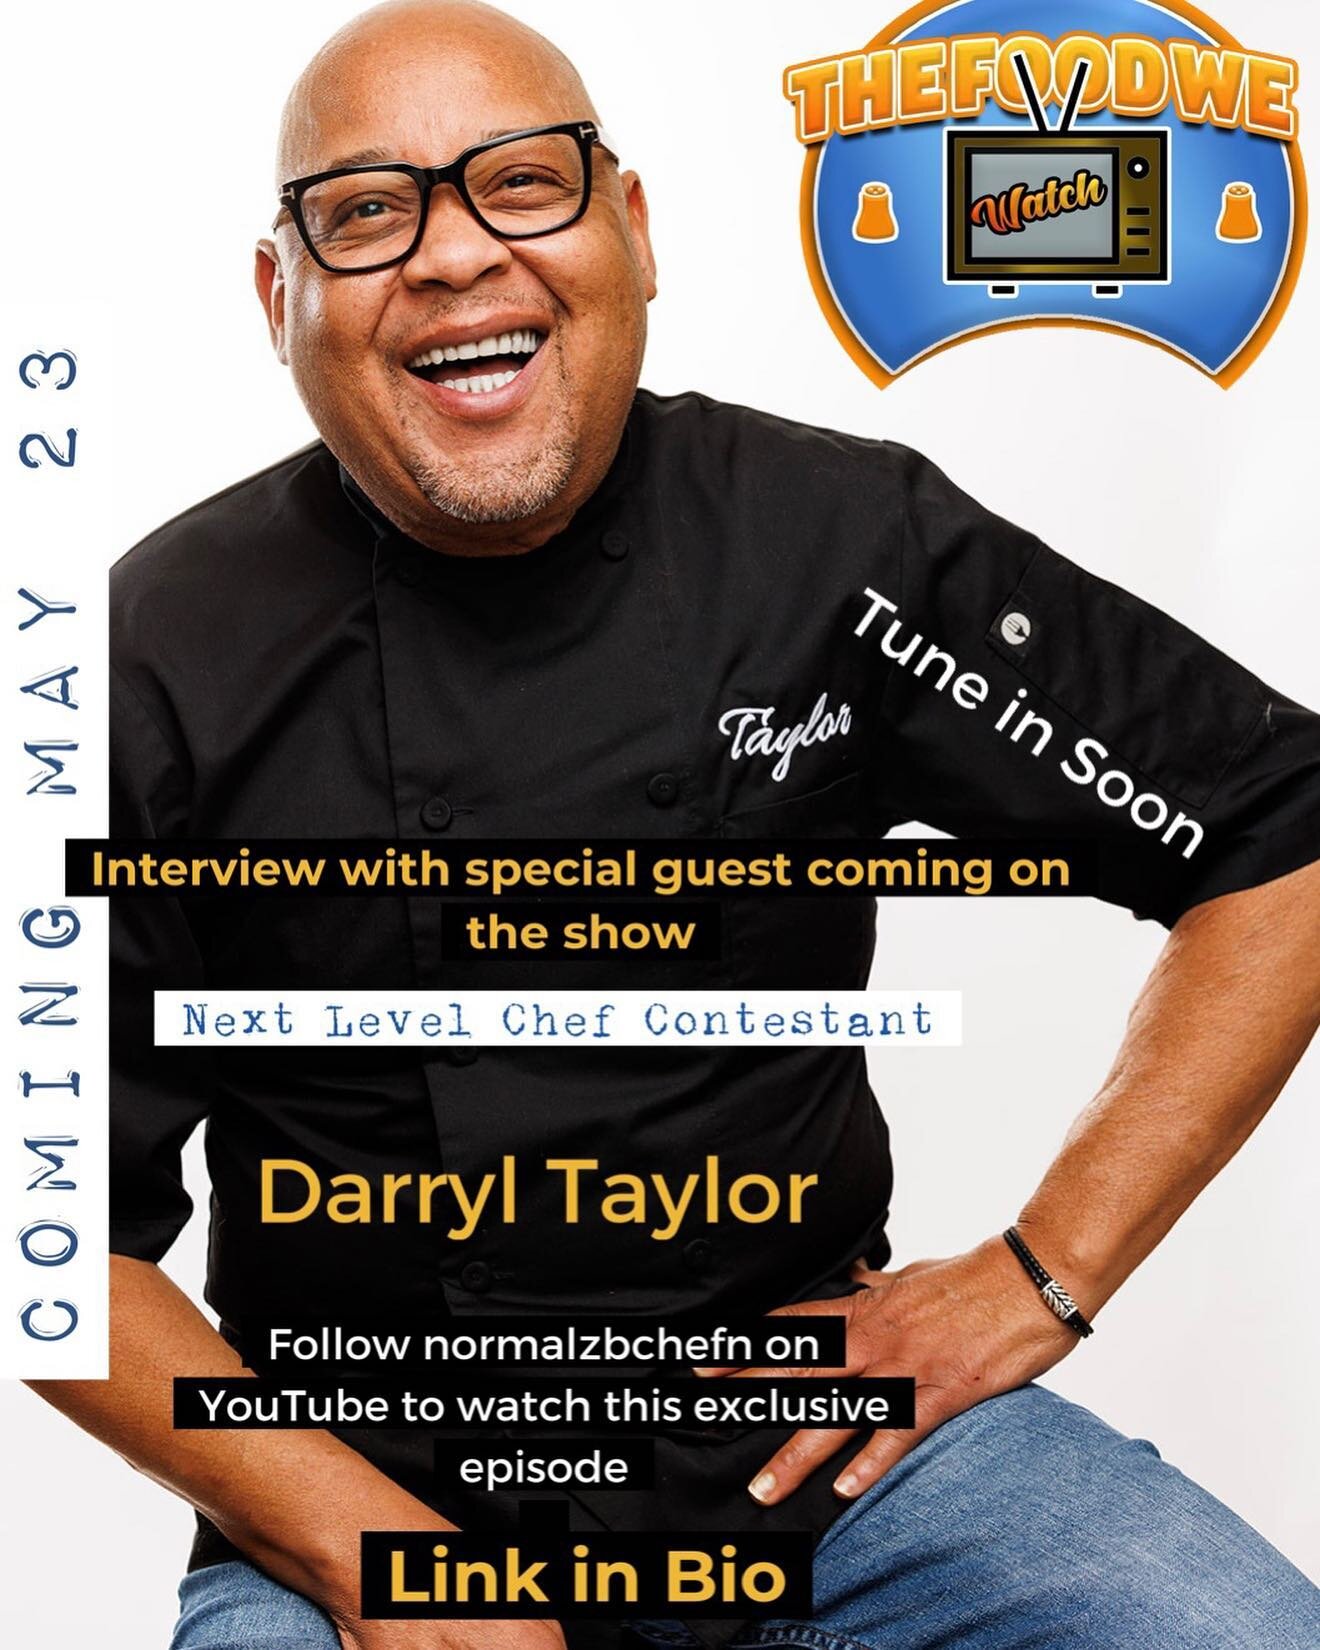 Mark your calendars and get ready to join us on Tuesday, May 23rd at 12 pm EST for an unforgettable episode of 'The Food We Watch' podcast. We're thrilled to have the talented Chef Darryl Taylor from Next Level Chef Season 2 join us for a mouth-water